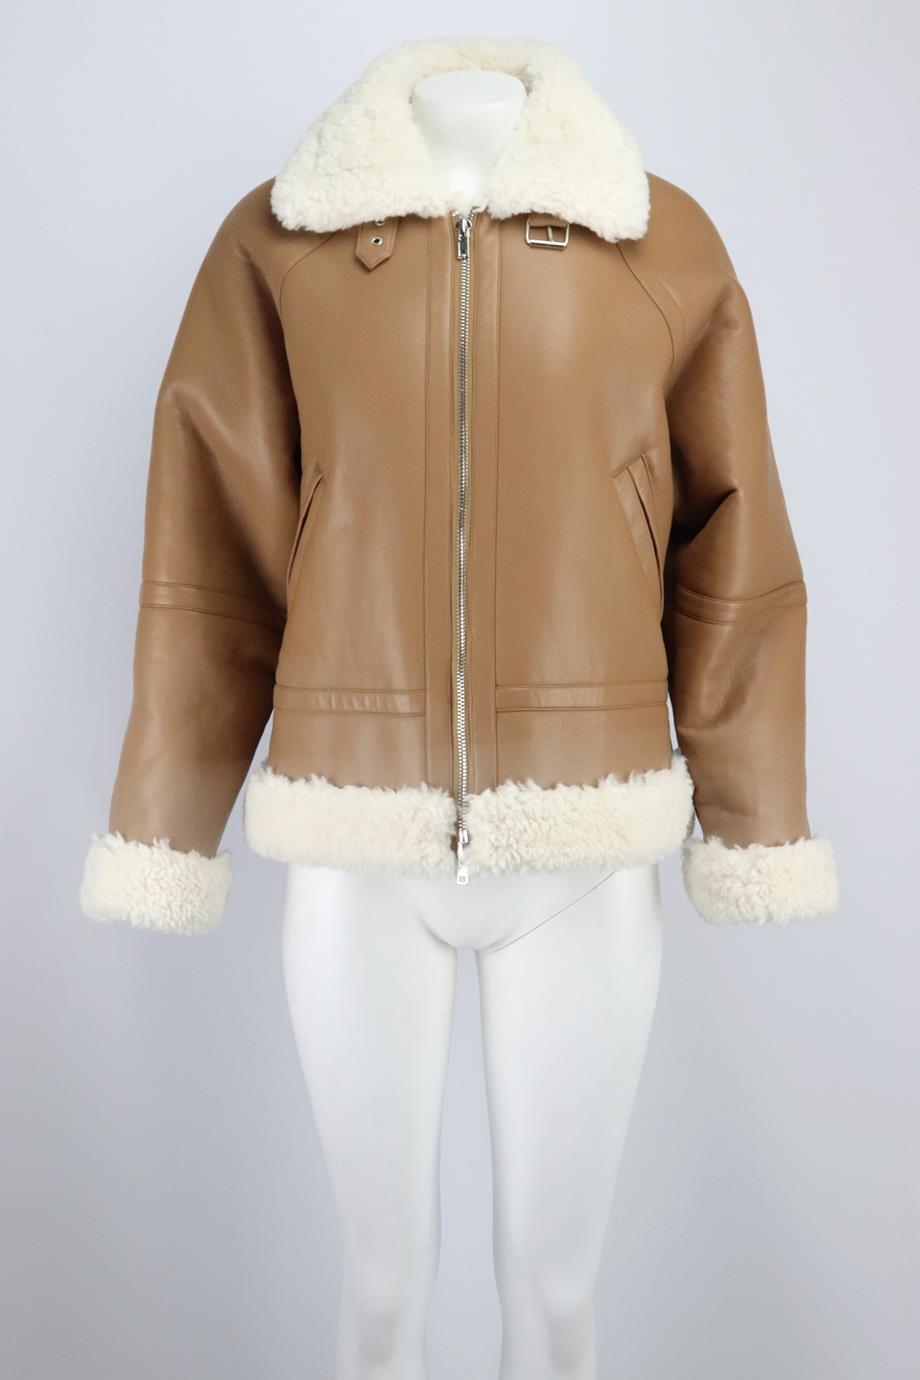 STAND STUDIO RIND FAUX SHEARLING JACKET SMALL